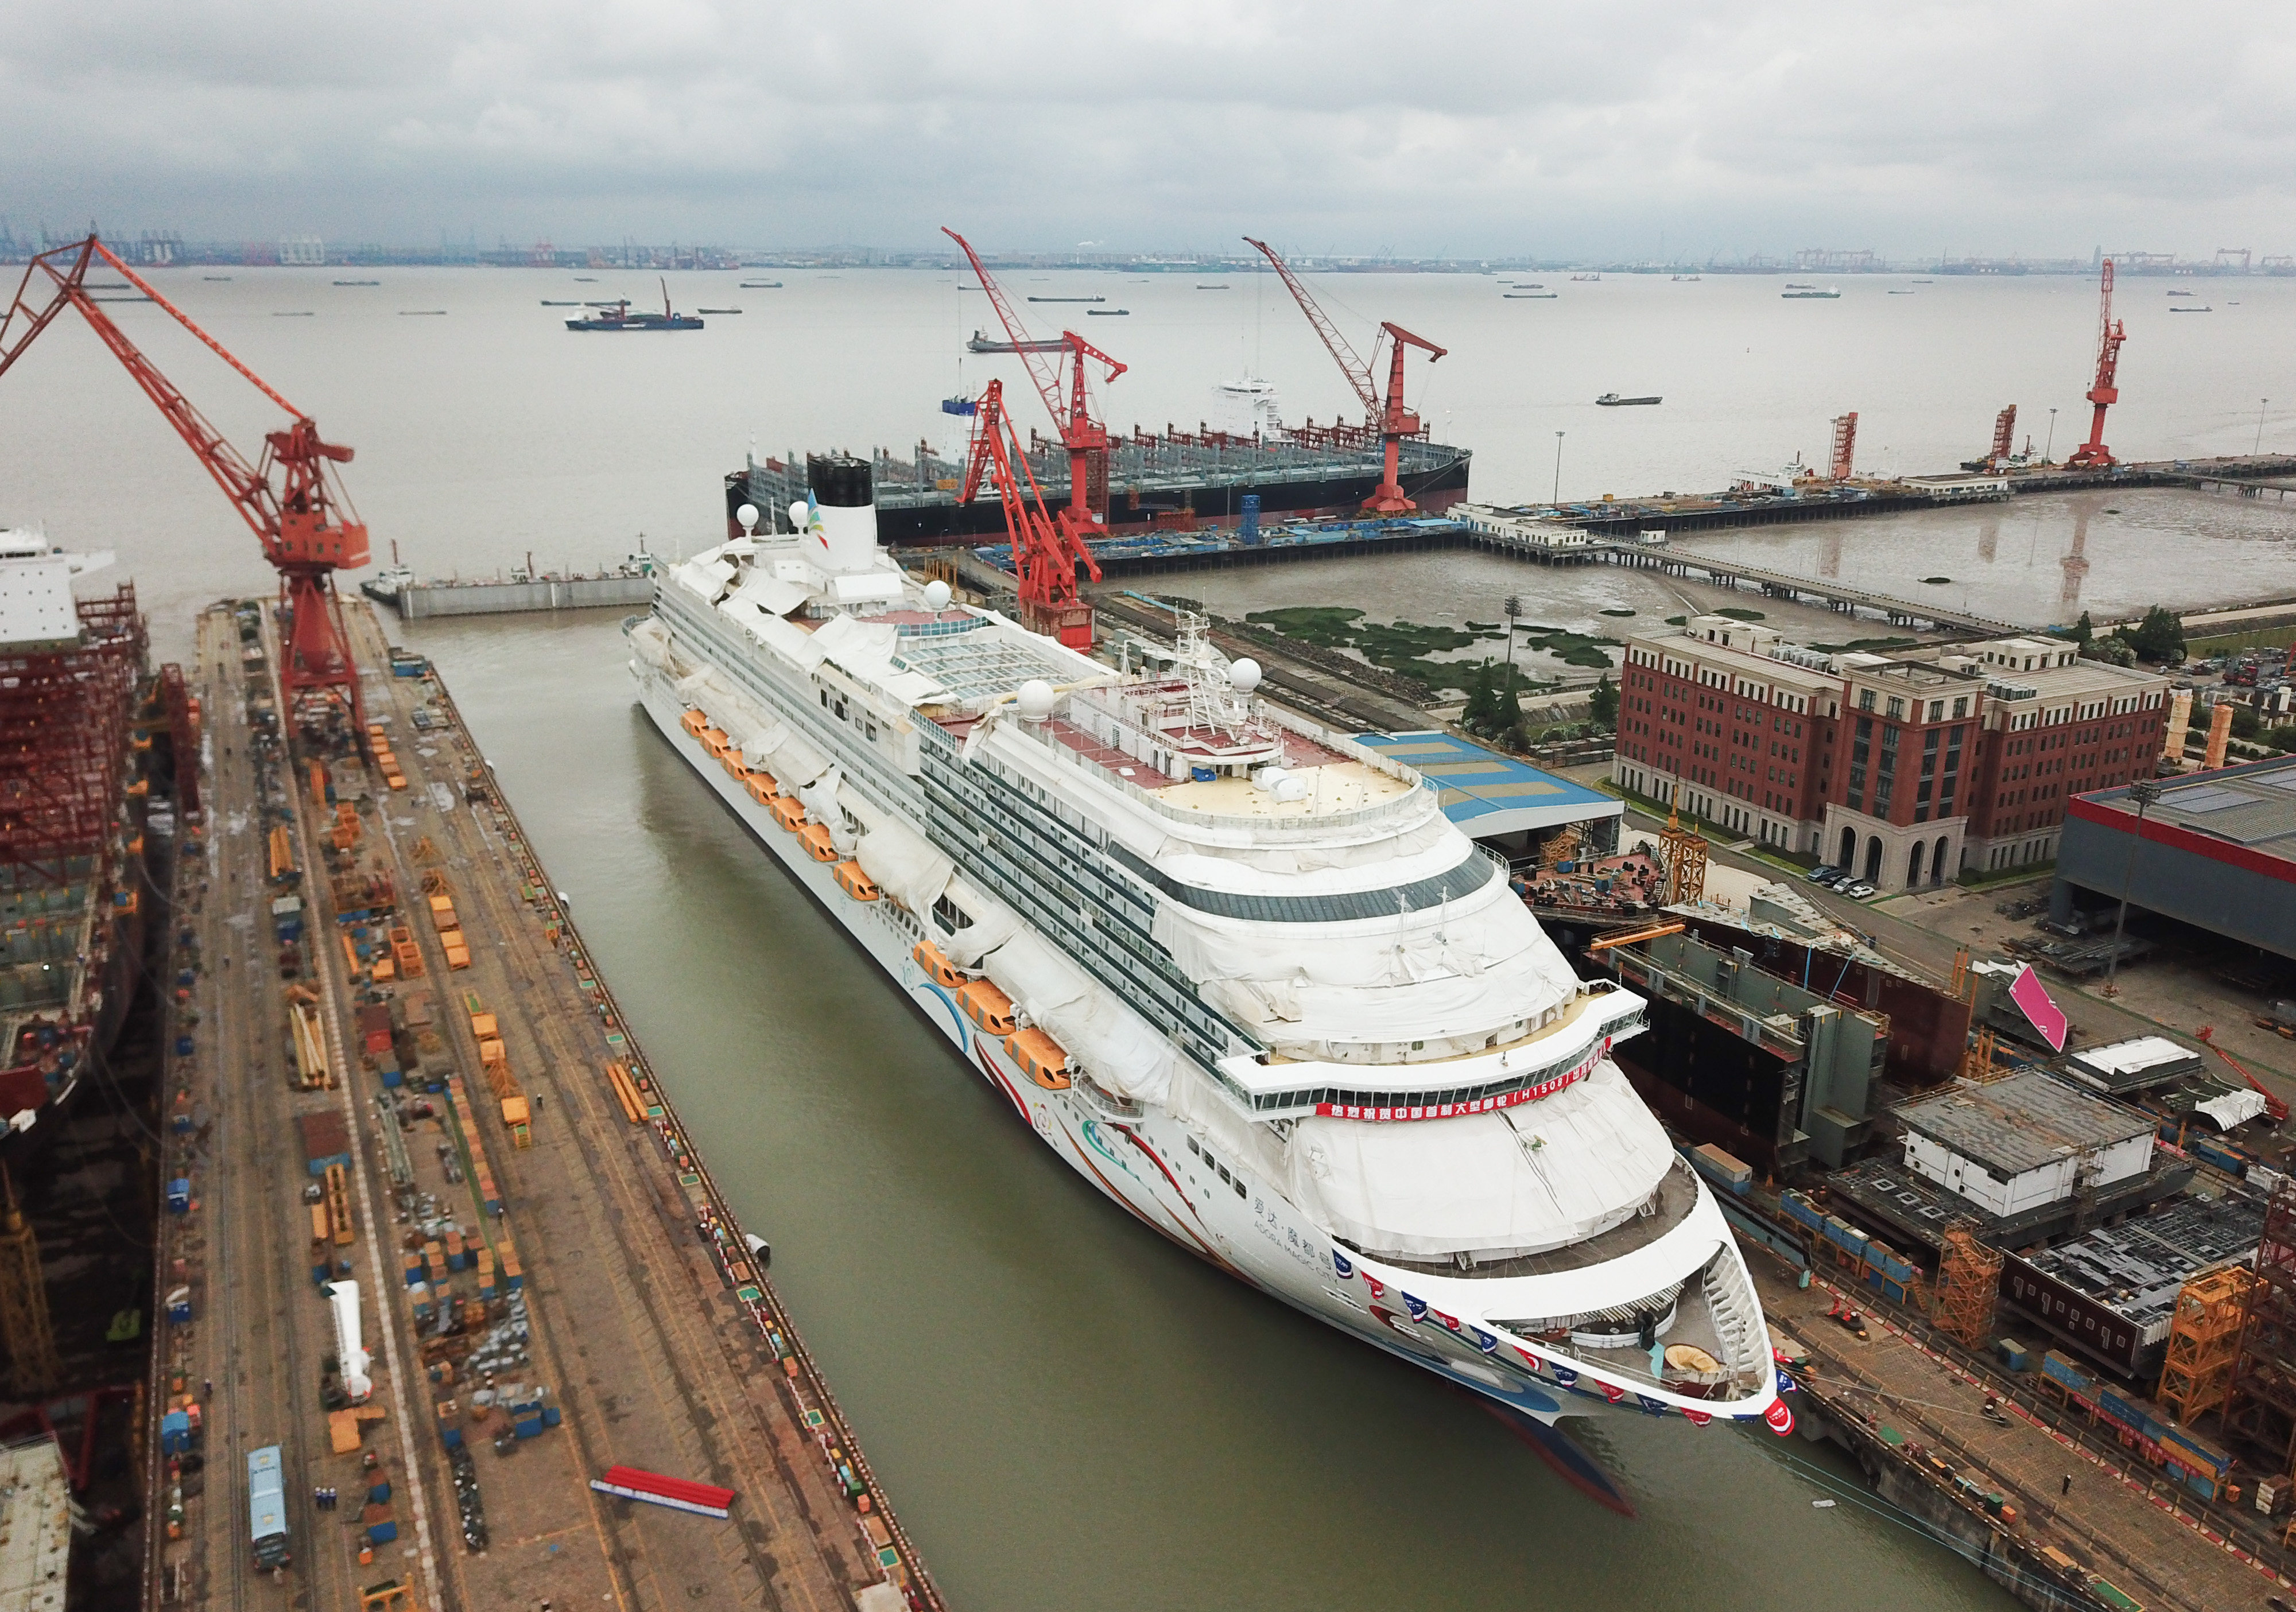 China’s first domestically built large cruise ship, the Adora Magic City, sits in port in Shanghai on June 6. The return of massive cruise ships to the world’s seas has renewed concerns about the amount of pollution they generate. Photo: Xinhua